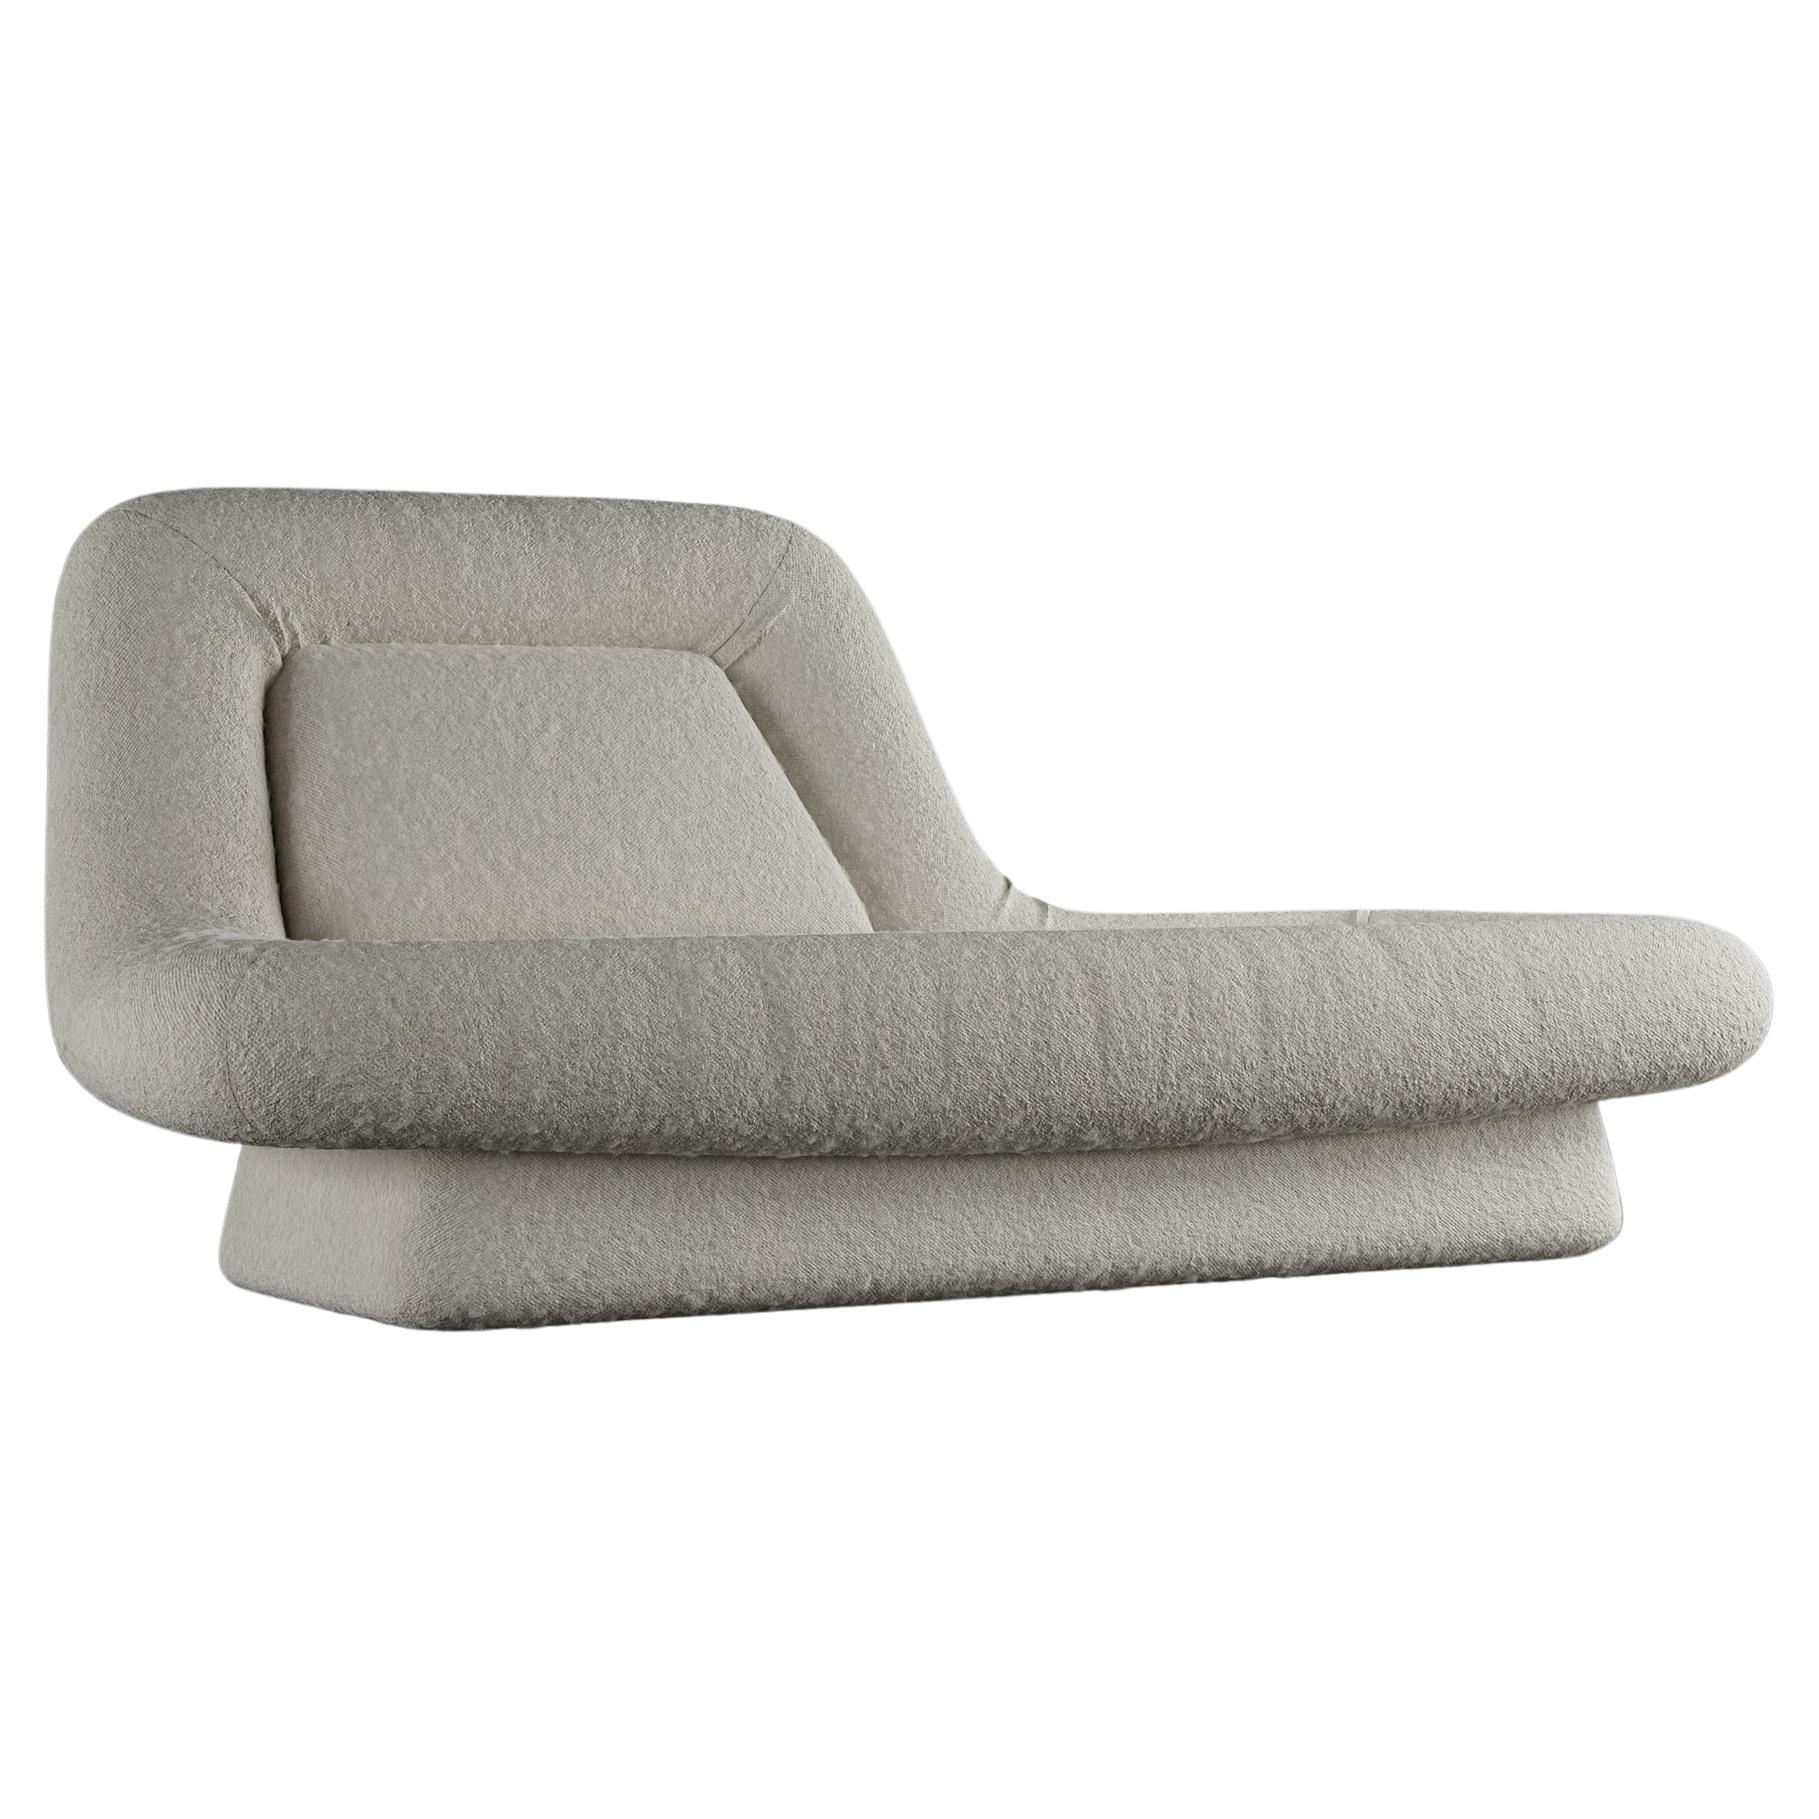 WAVE CHAISE LOUNGE - Modern Design in Cloud Boucle in Warm White